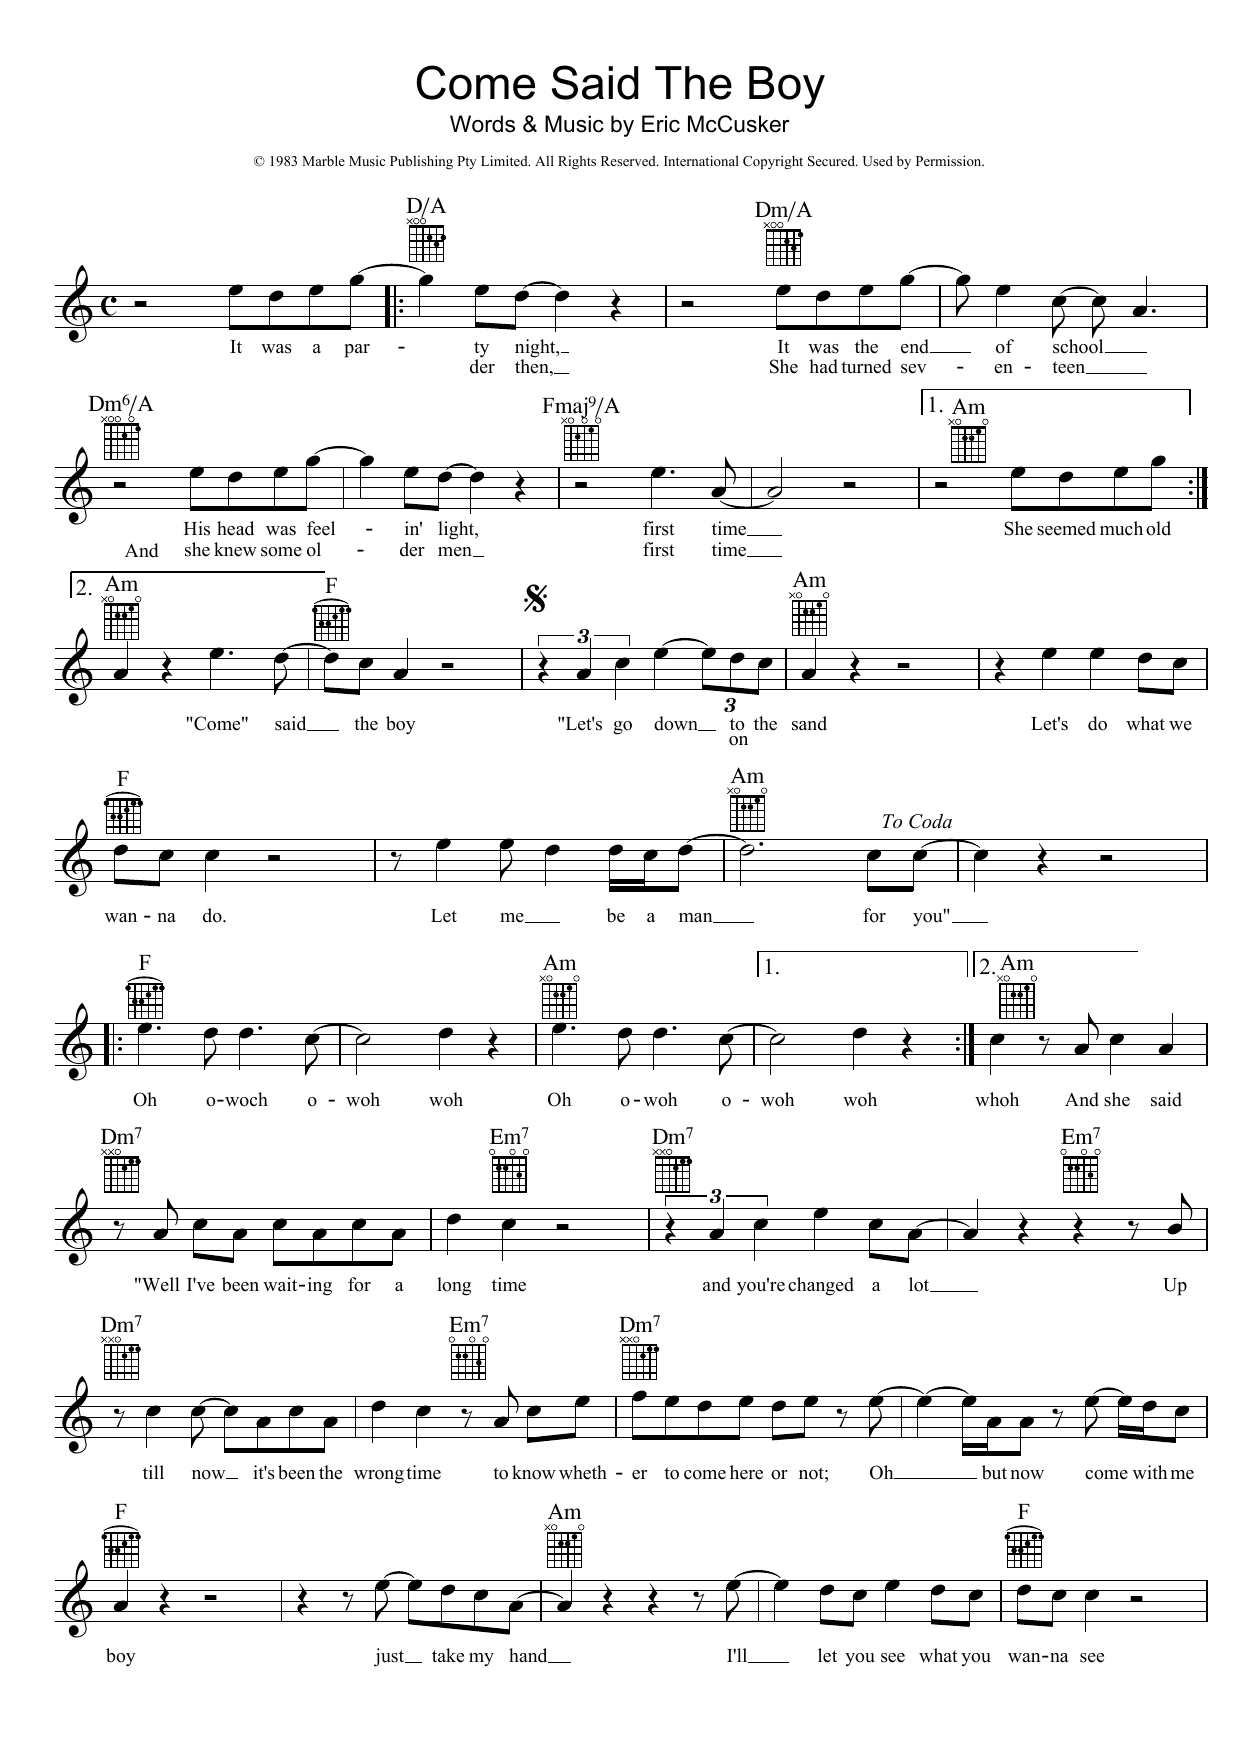 Download Mondo Rock Come Said The Boy sheet music notes and chords for Melody Line, Lyrics & Chords - Download Printable PDF and start playing in minutes.